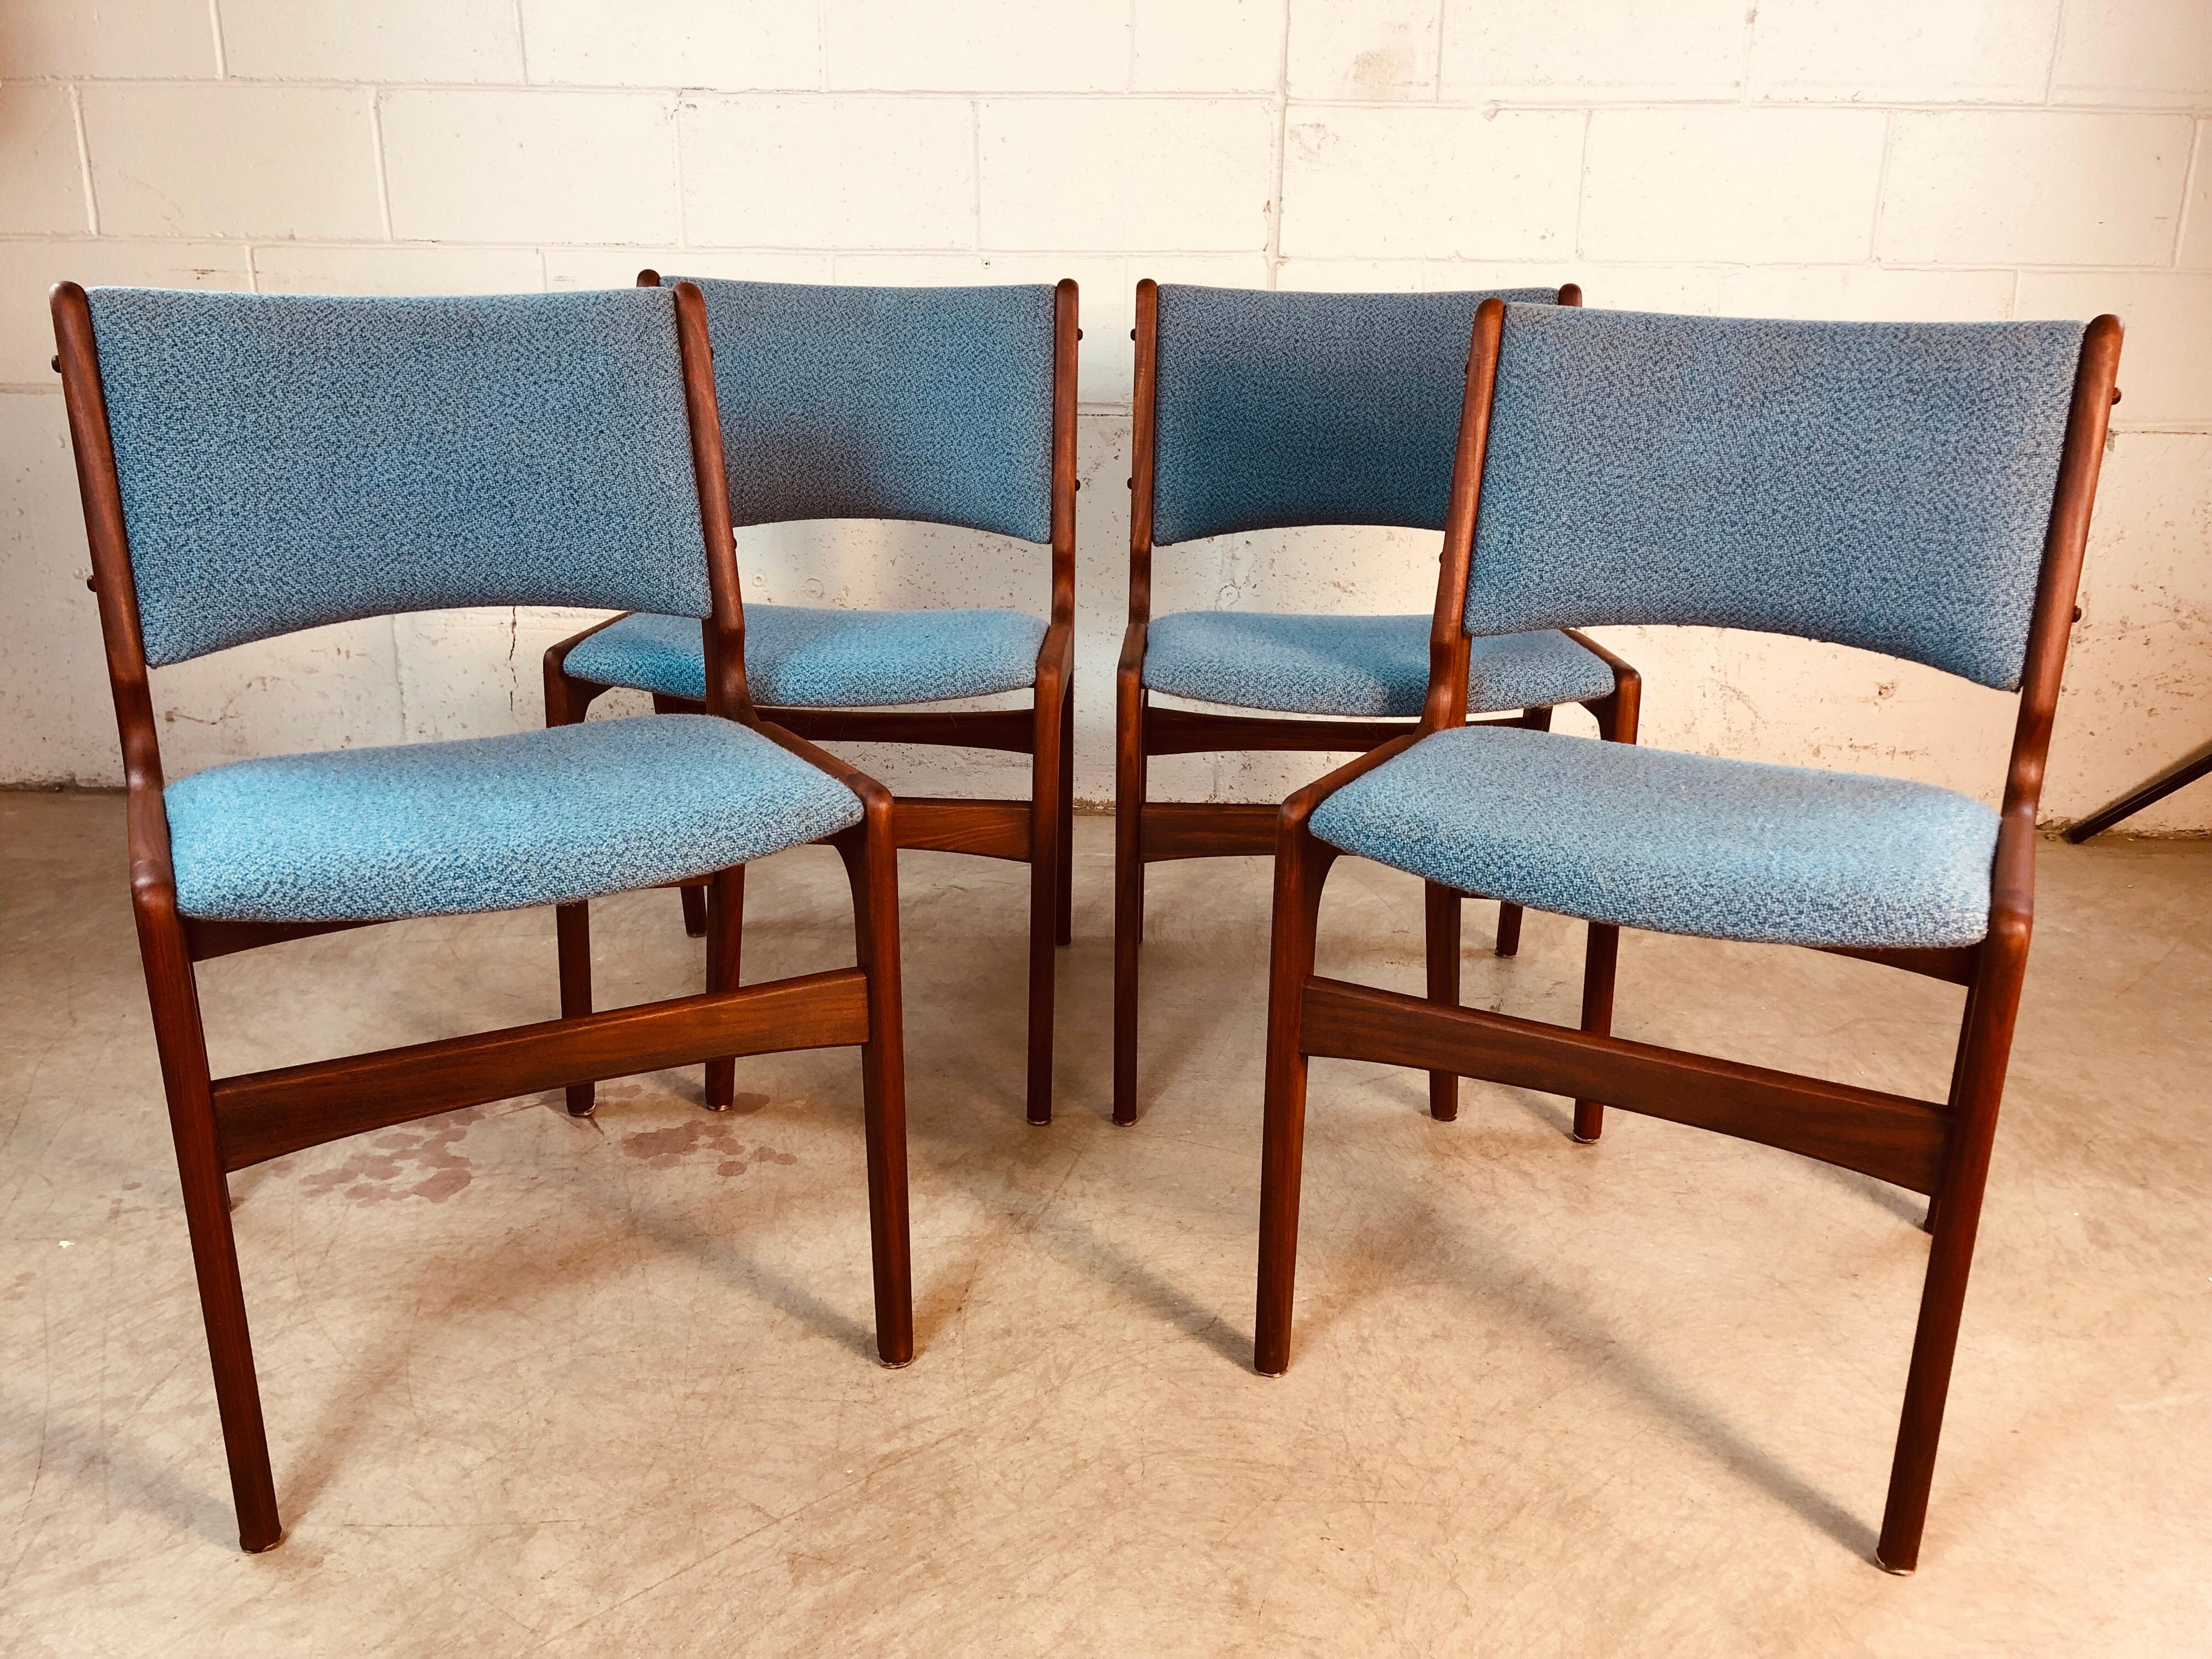 1960s Danish teak set of 4 dining room chairs with the original tweed fabric. The chairs have a nice dark teak finish and have been fully restored. No marks.